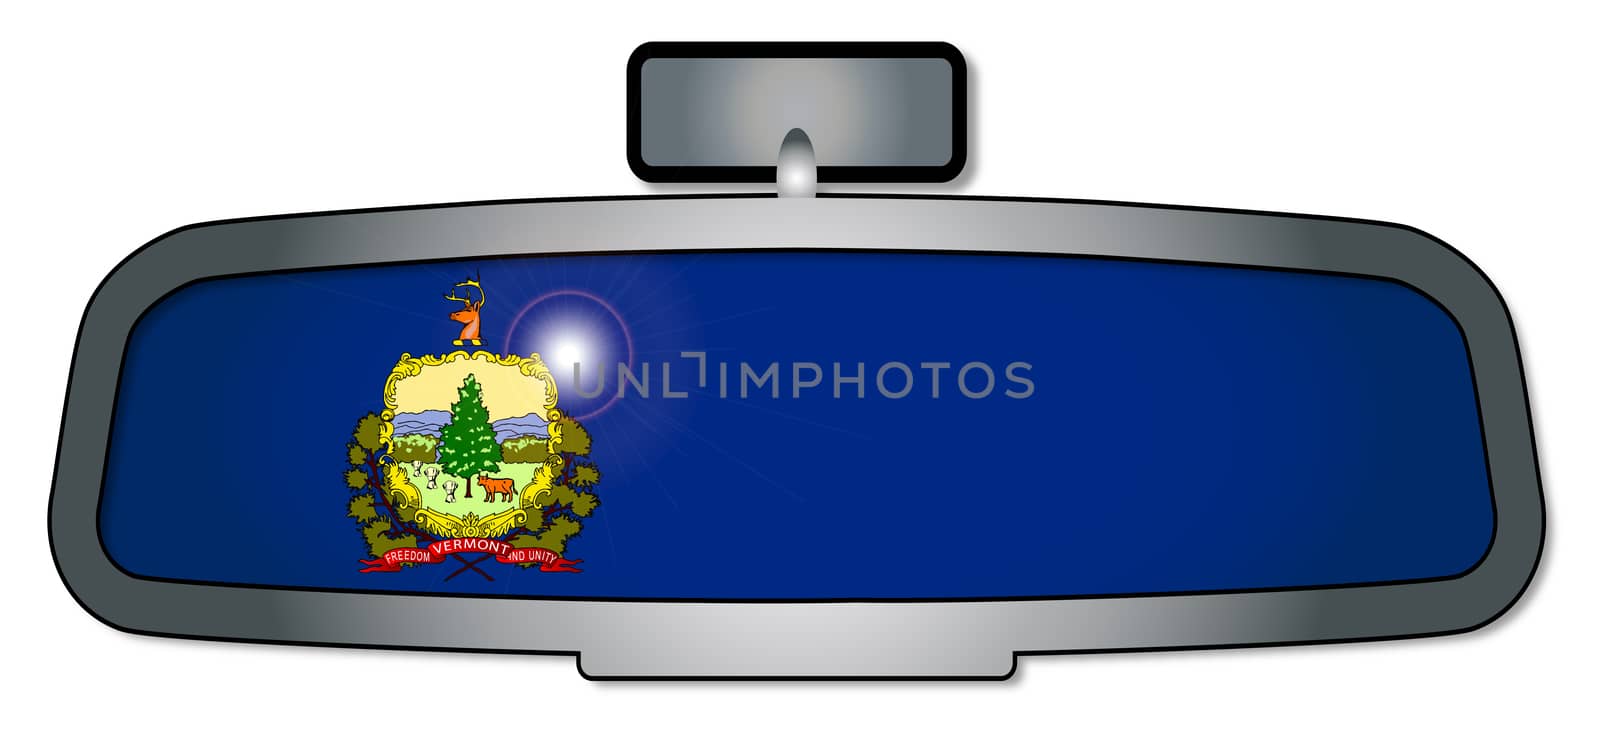 A vehicle rear view mirror with the flag of the state of Vermont